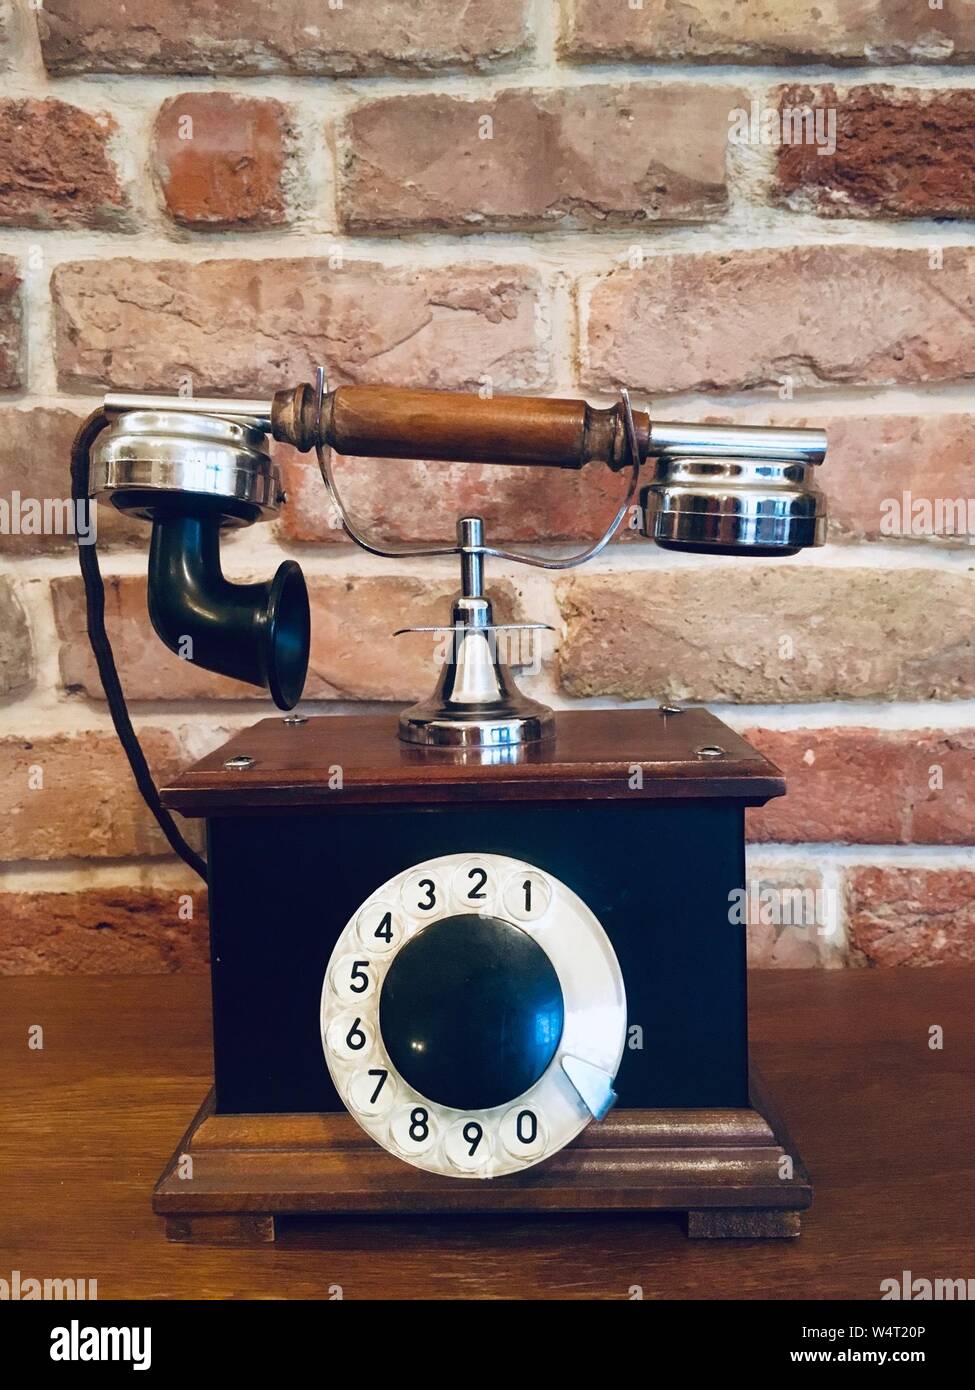 Old vintage phone on a table Stock Photo